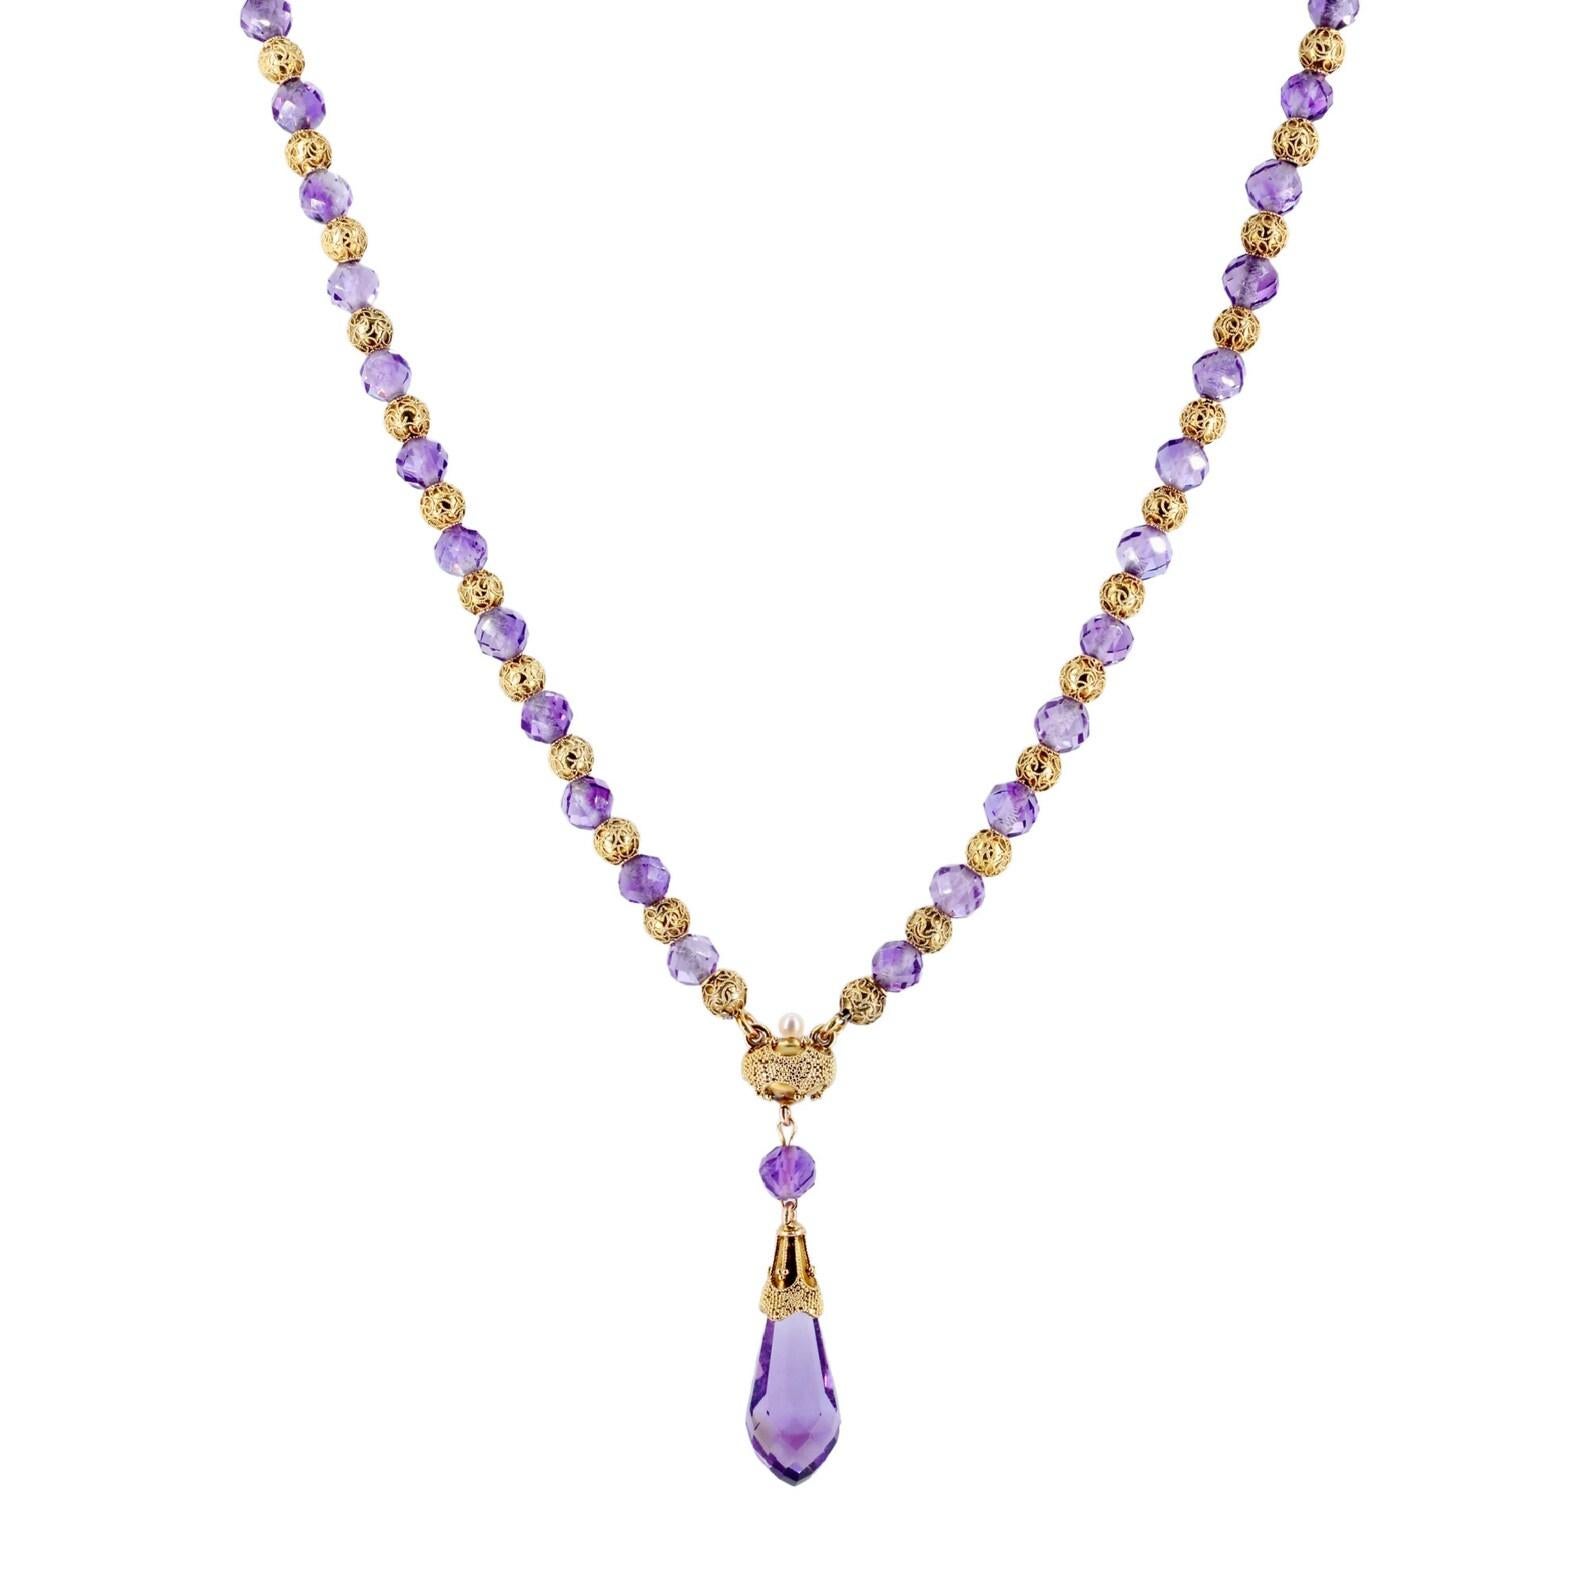 A victorian period amethyst, and gold bead drop necklace. Centered by a briolette cut amethyst pendant, suspended from a beautifully embellished gold mount. Framed by alternating faceted amethyst beads, and embellished beads of rich 18 karat gold.